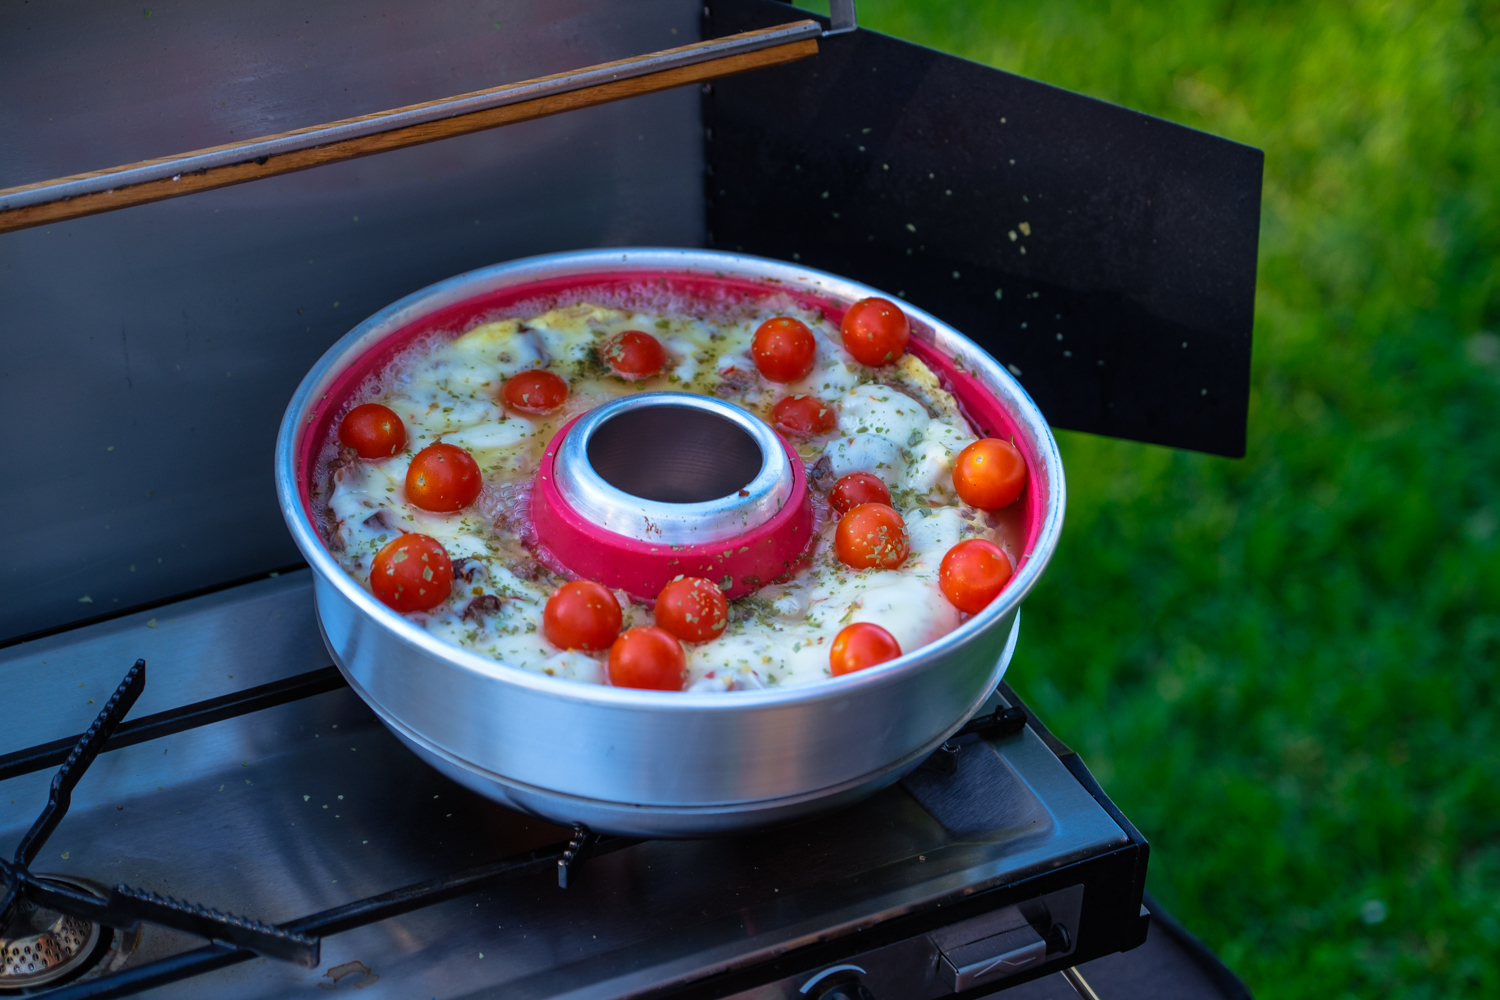 Reviewed: The Omnia Oven We Never Knew We Needed - Expedition Portal